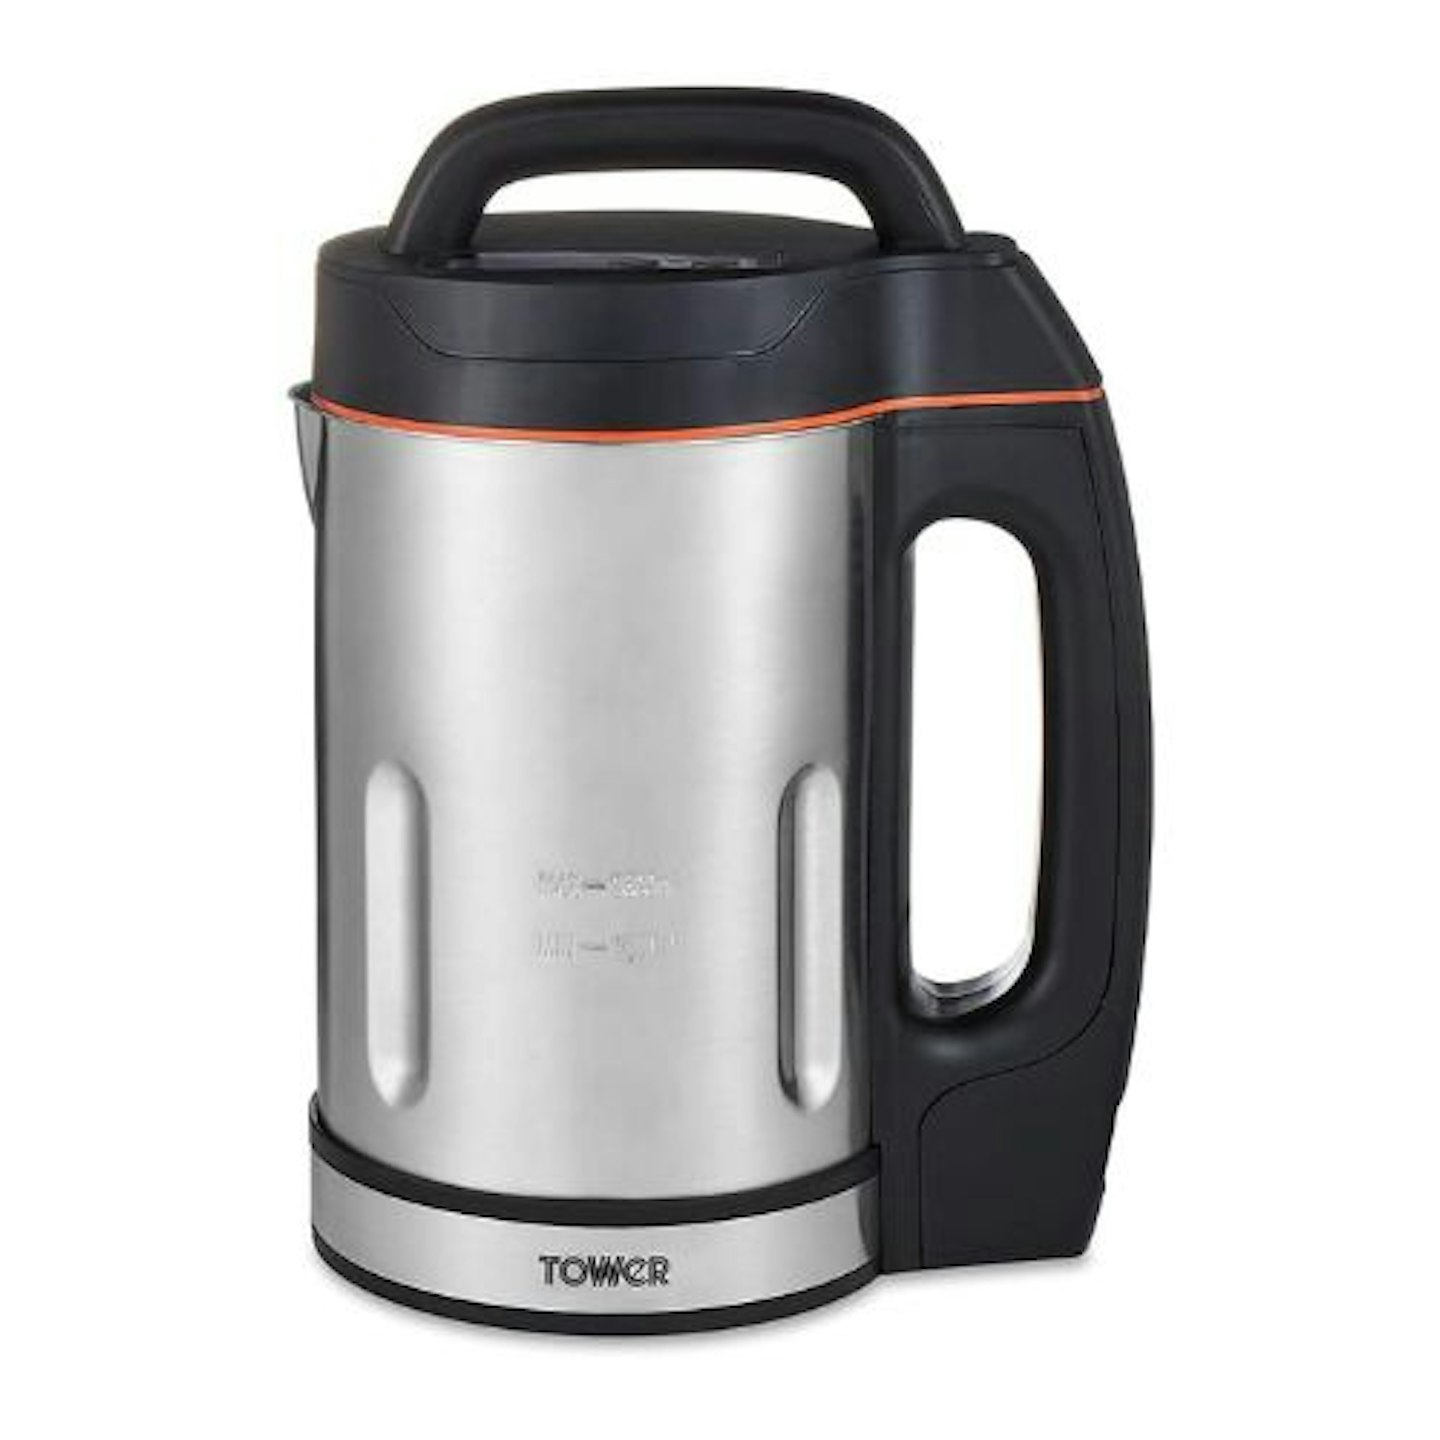 Tower T12031 Soup & Smoothie Maker